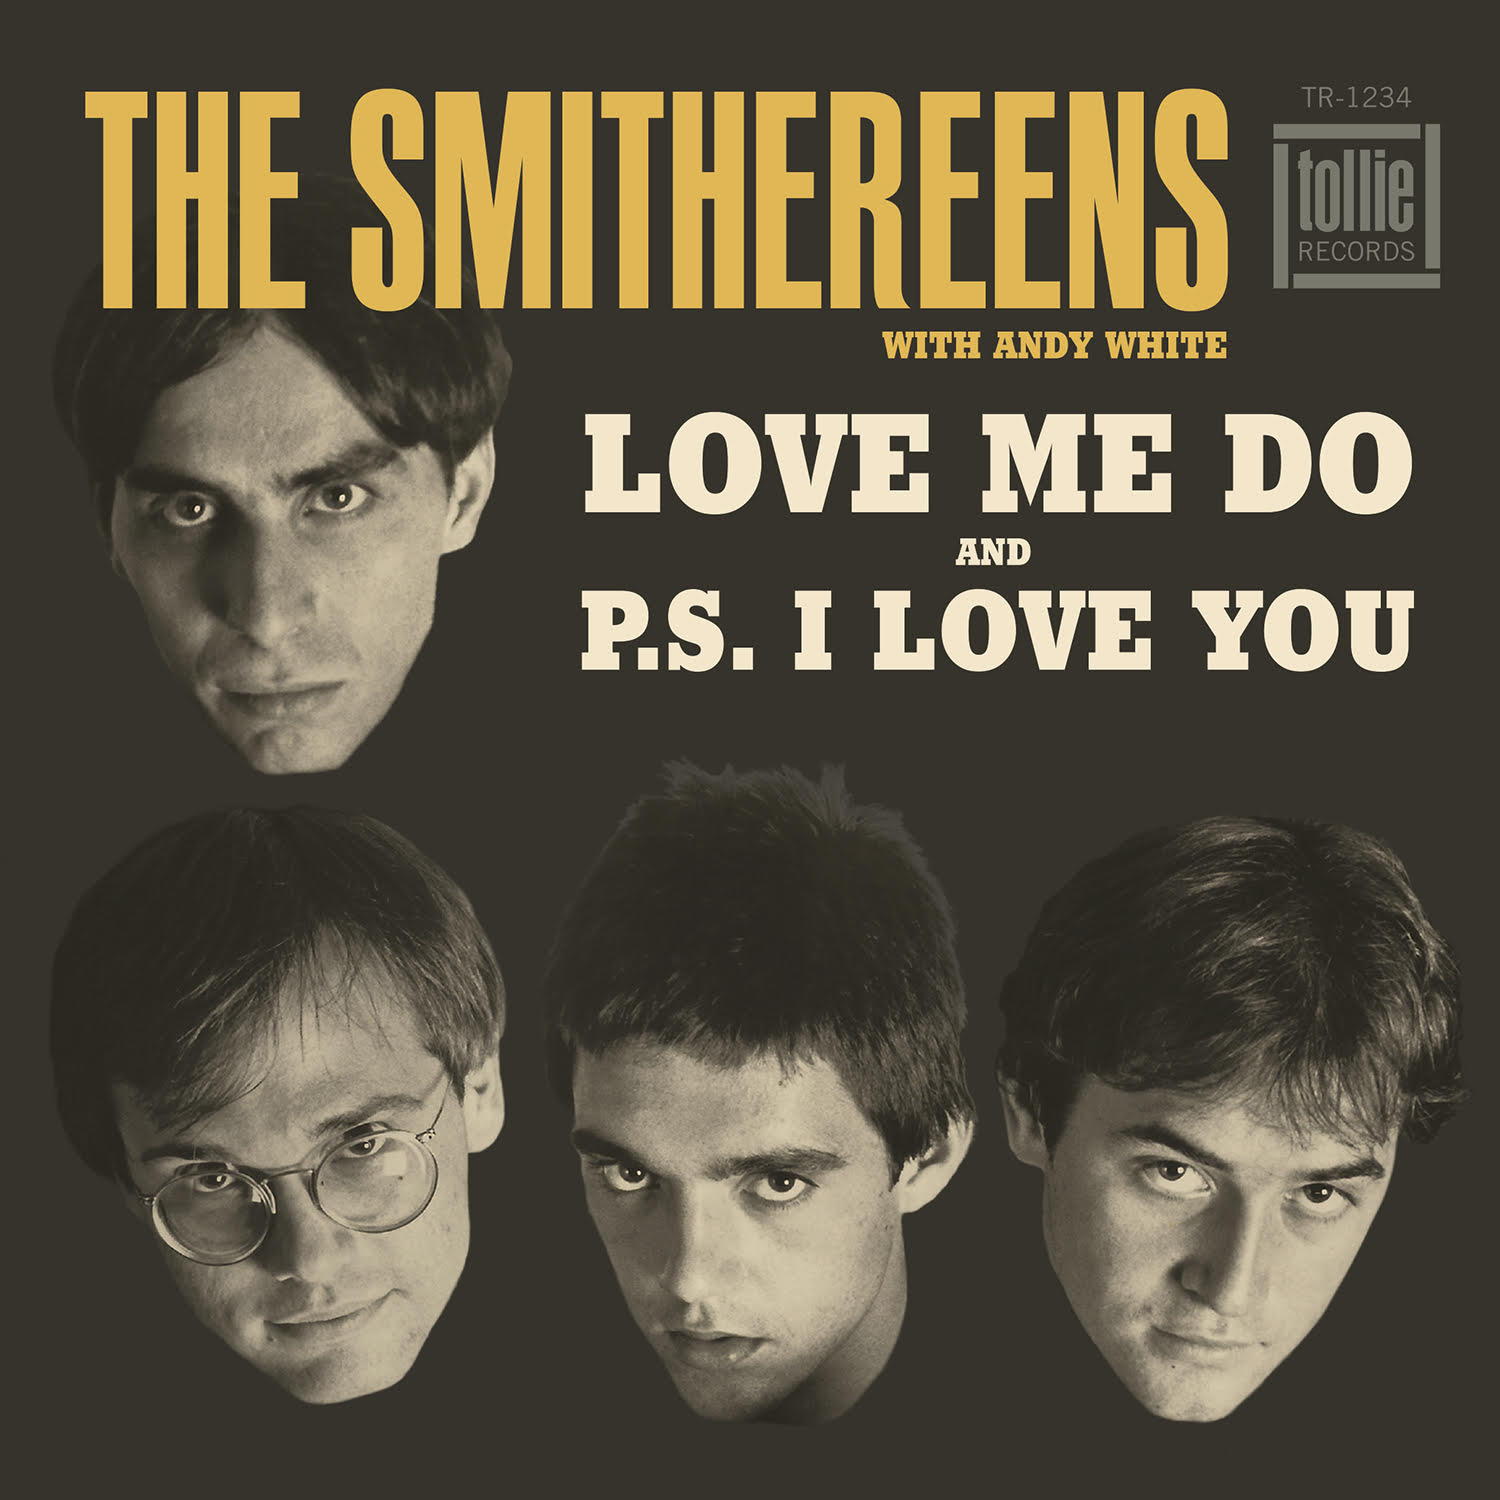 The Smithereens Pay Tribute To The Beatles With “Love Me Do/P.S. I Love You” 45 RPM Release